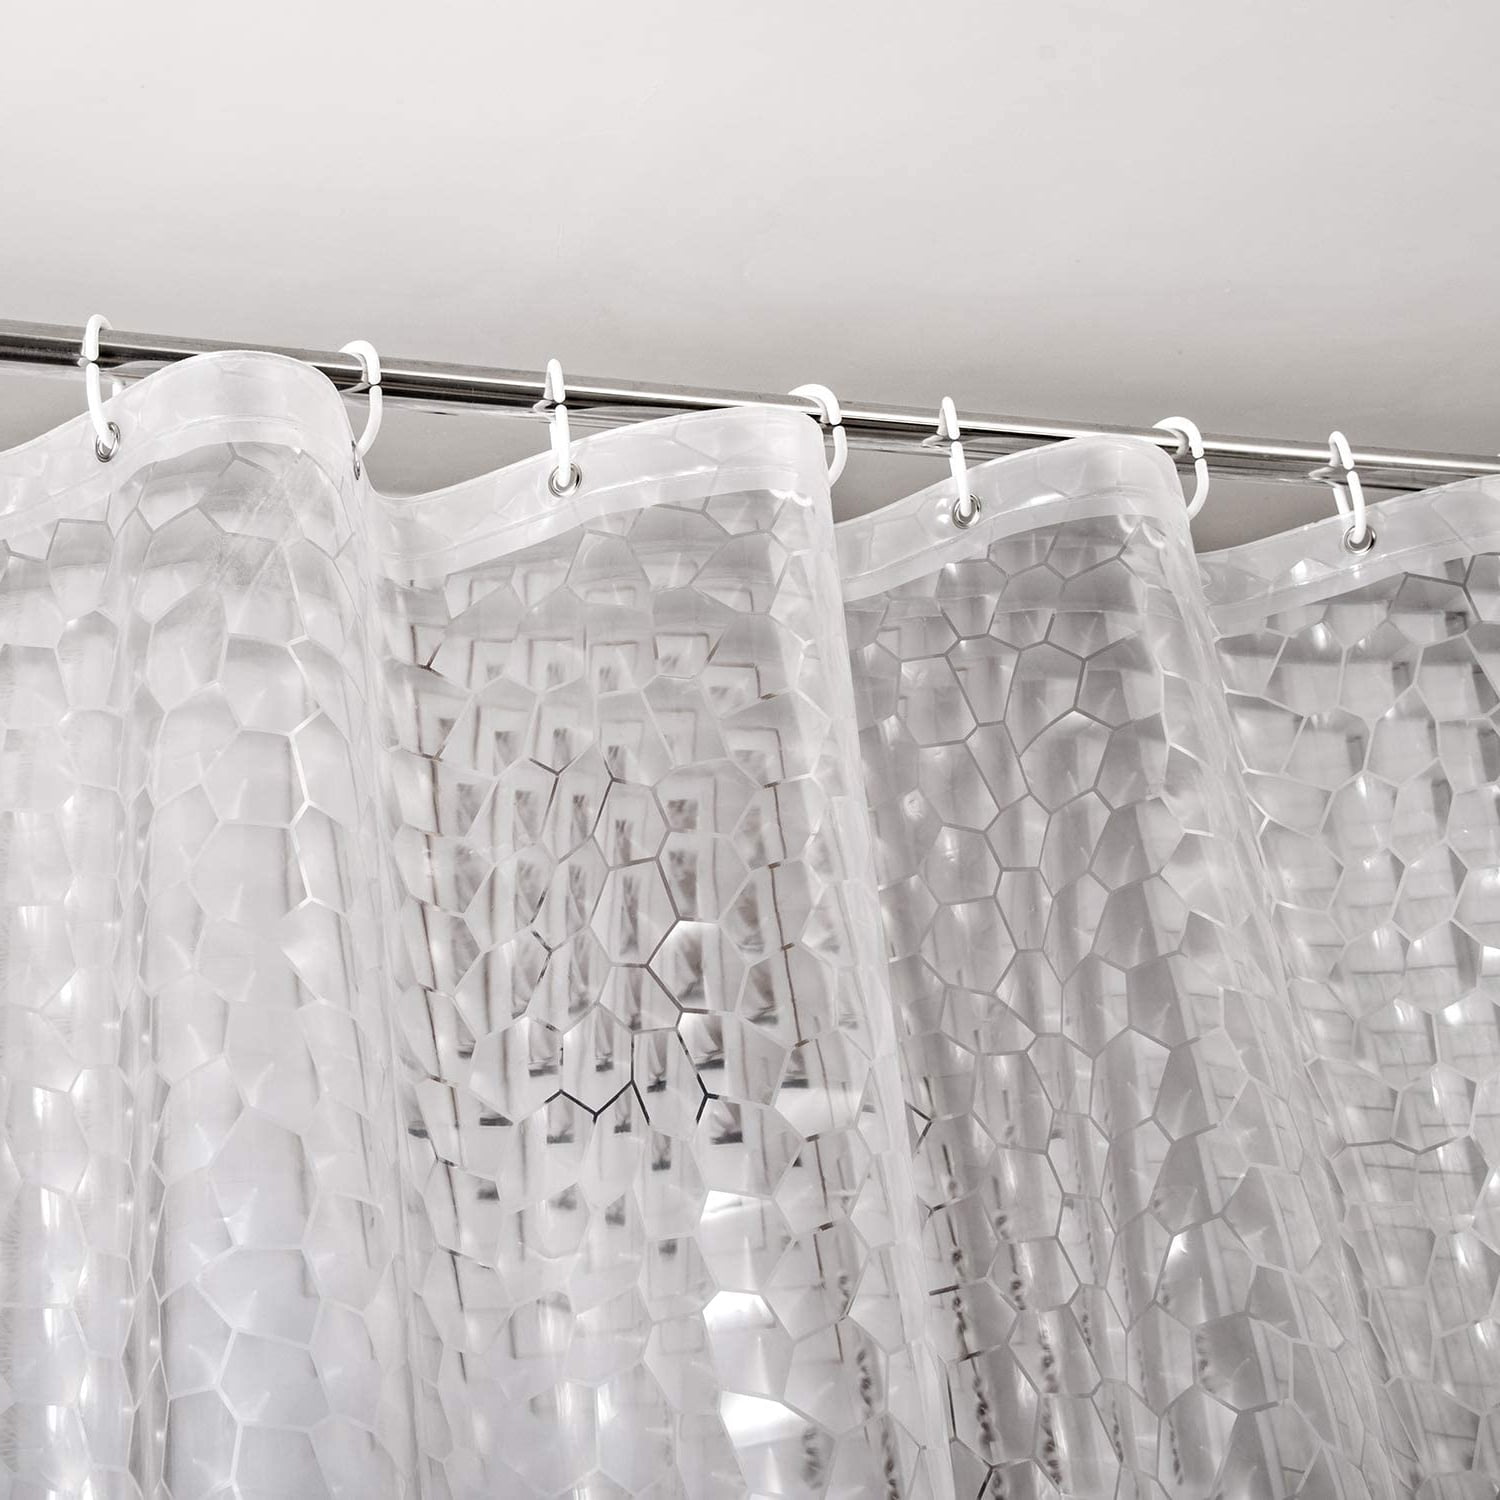 Details about   Fashion Thicker PEVA Diamond Shower Curtain 3D Water Cube Mold Water Decor AL 